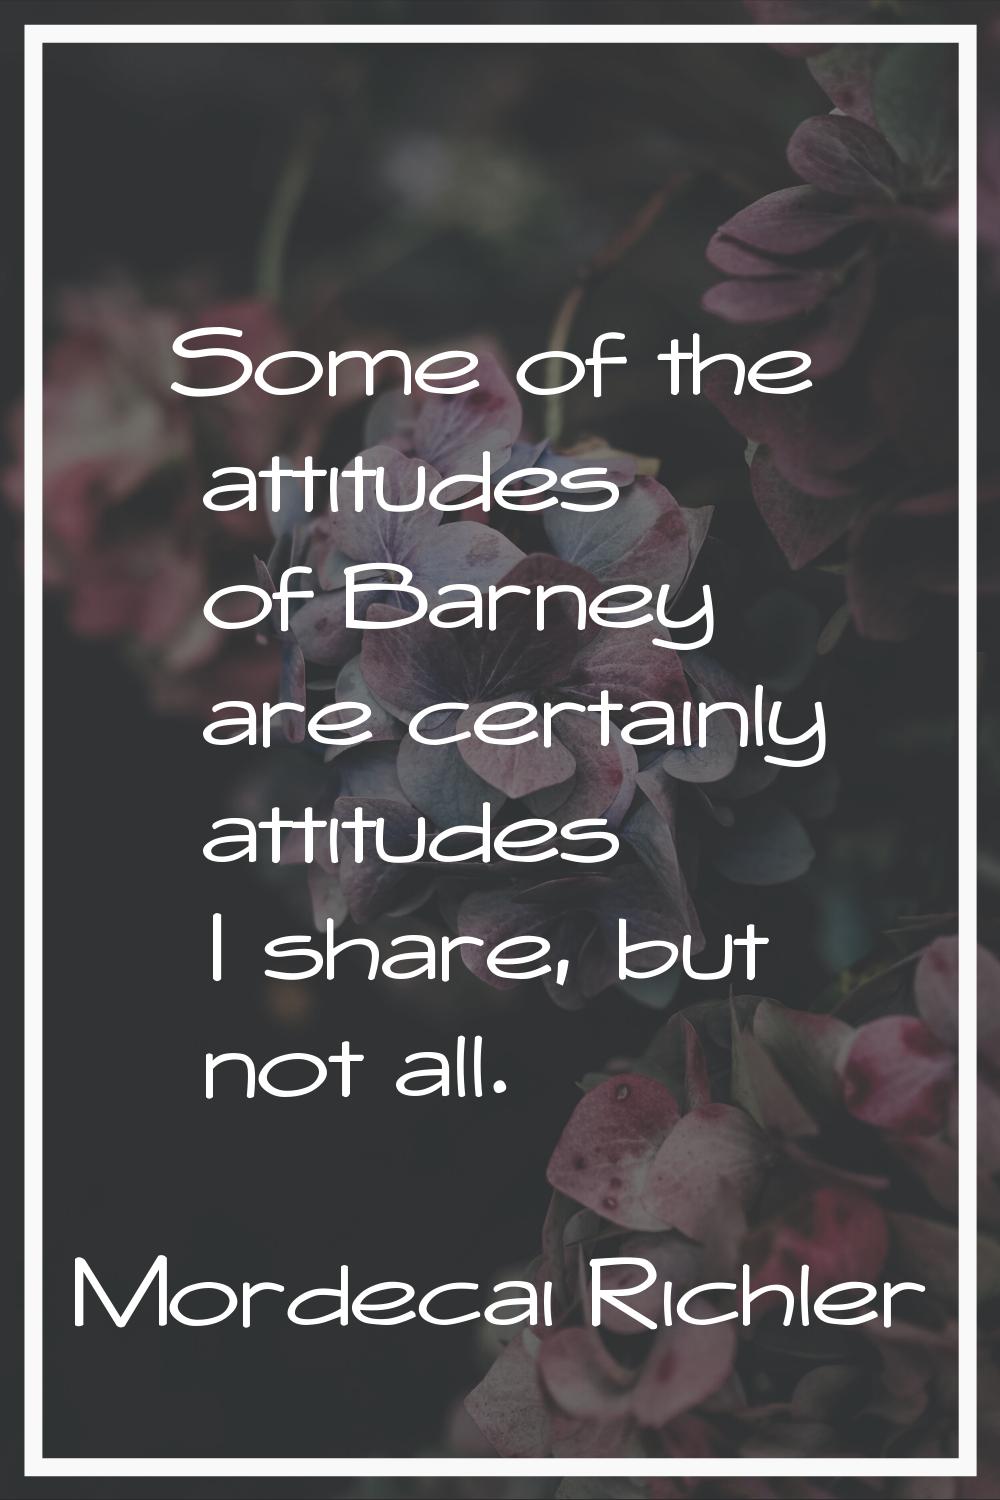 Some of the attitudes of Barney are certainly attitudes I share, but not all.